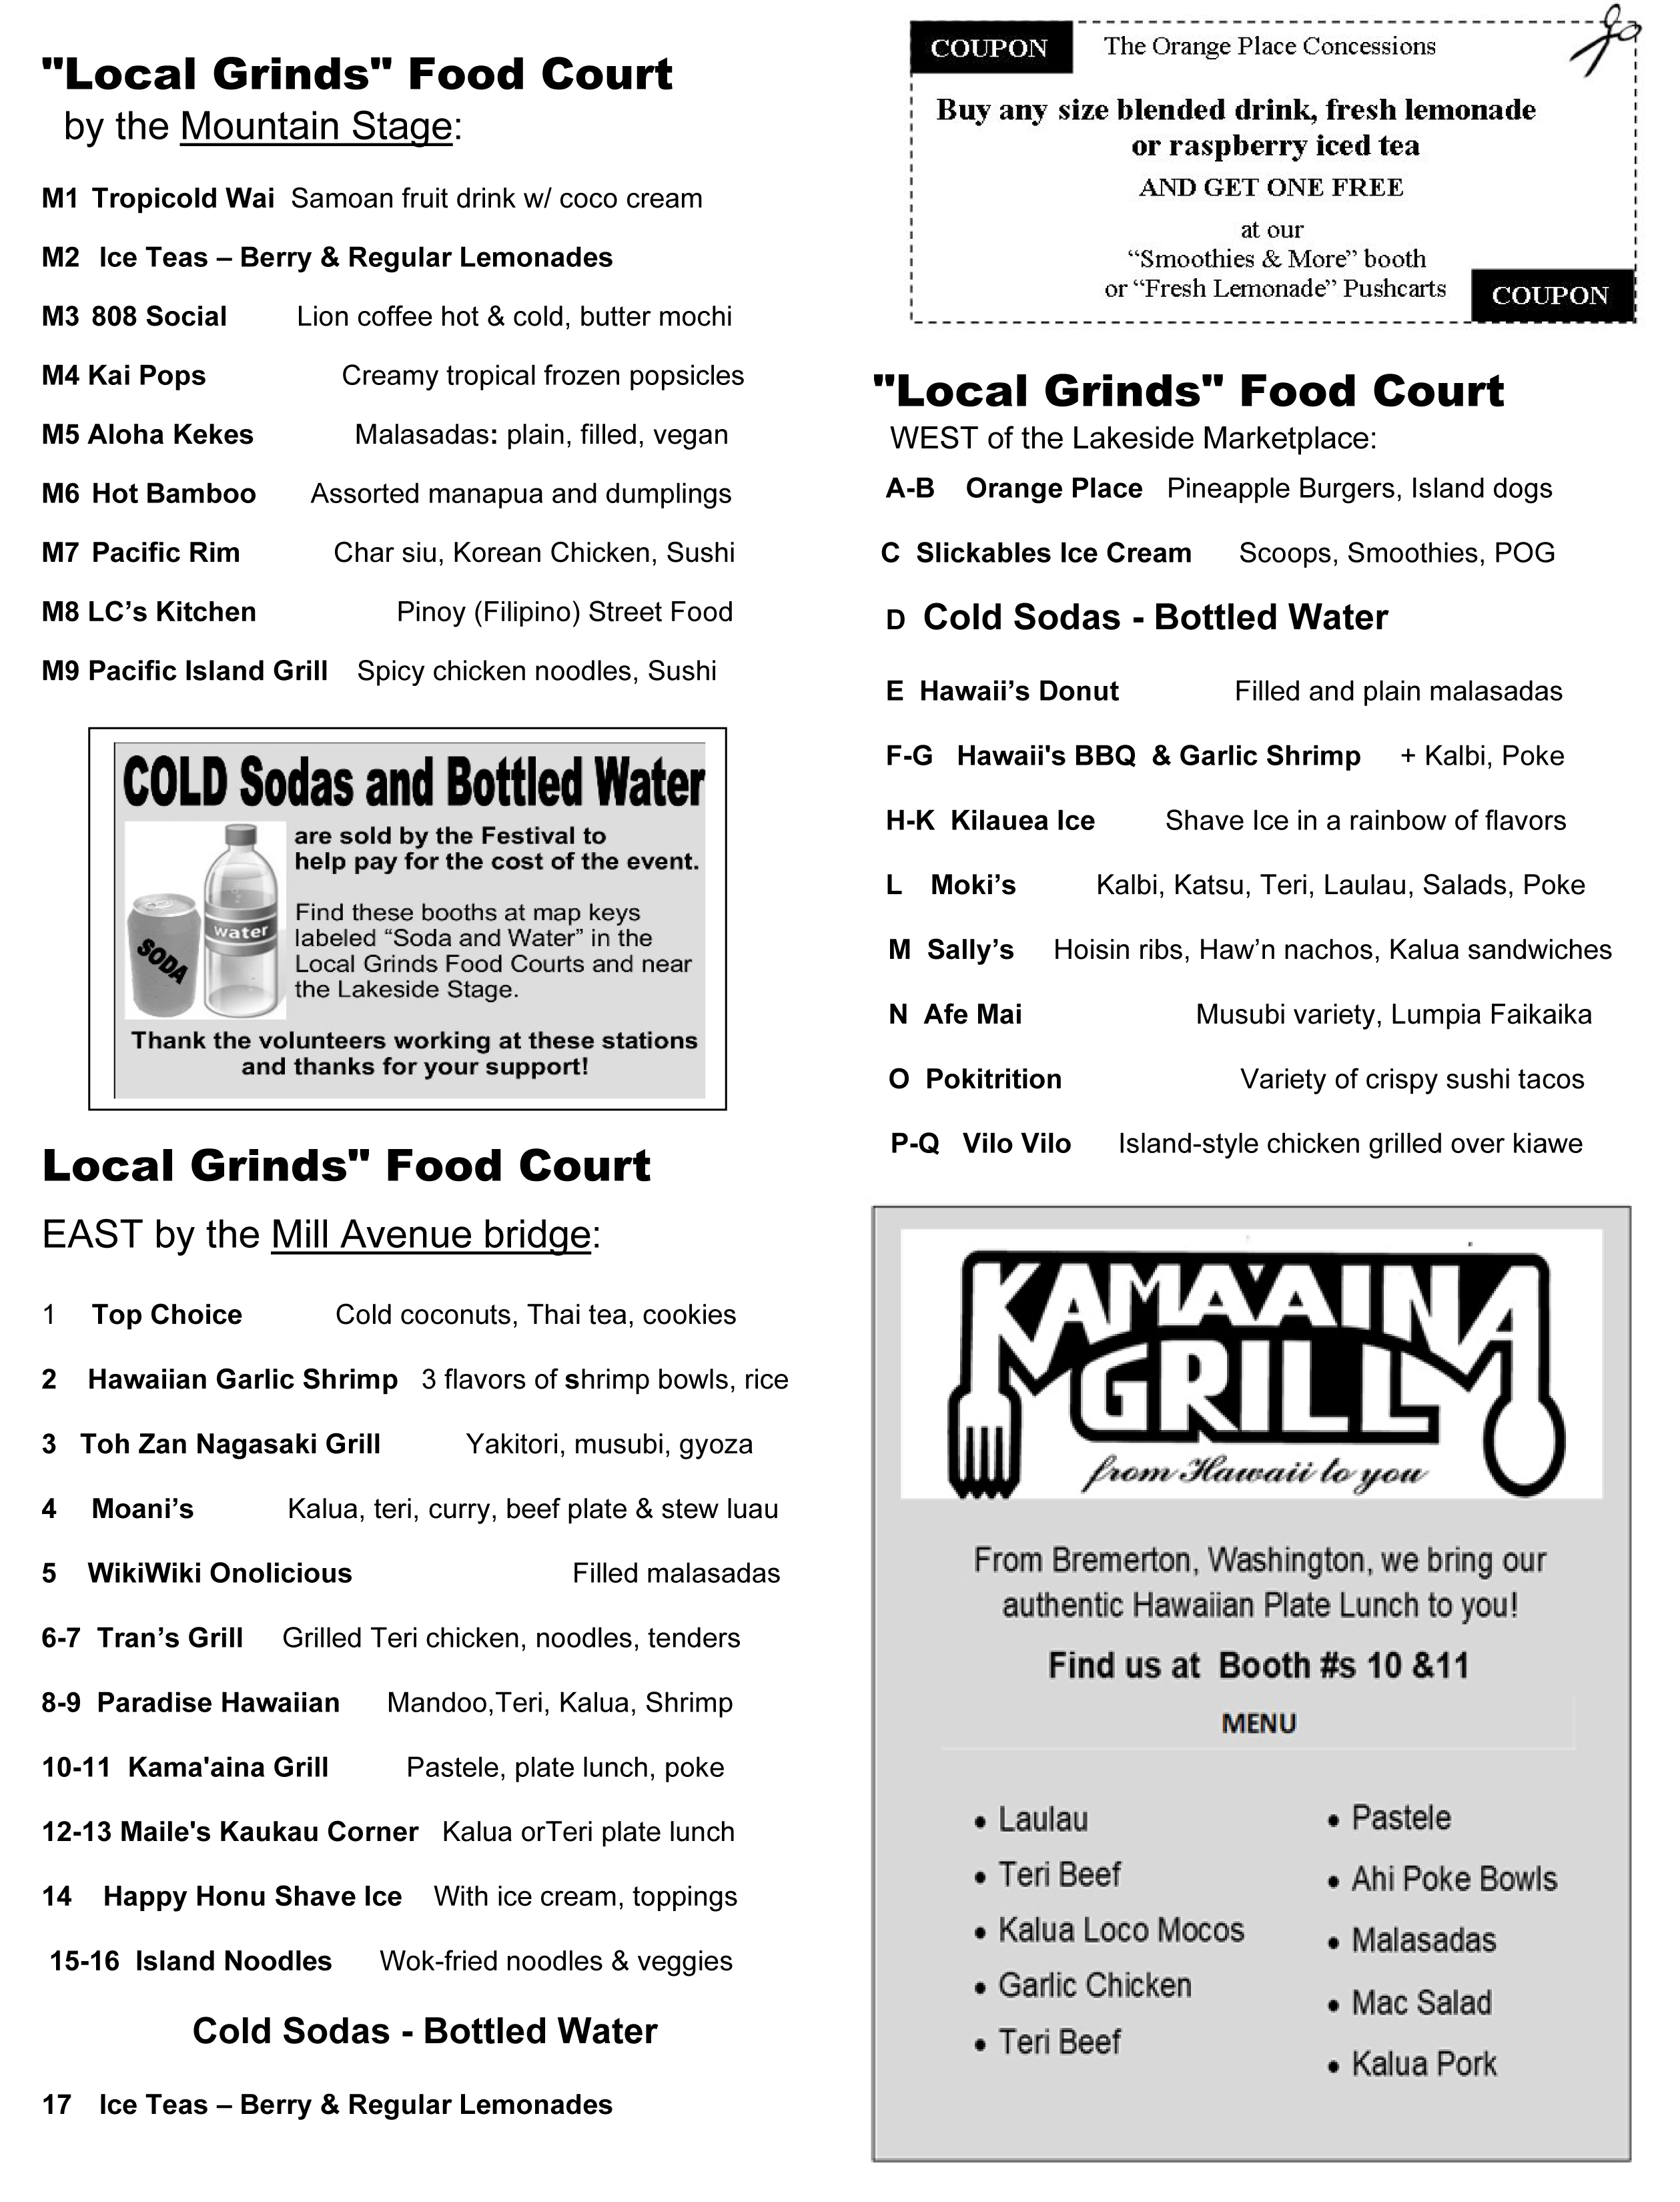 Food vendors list and locations